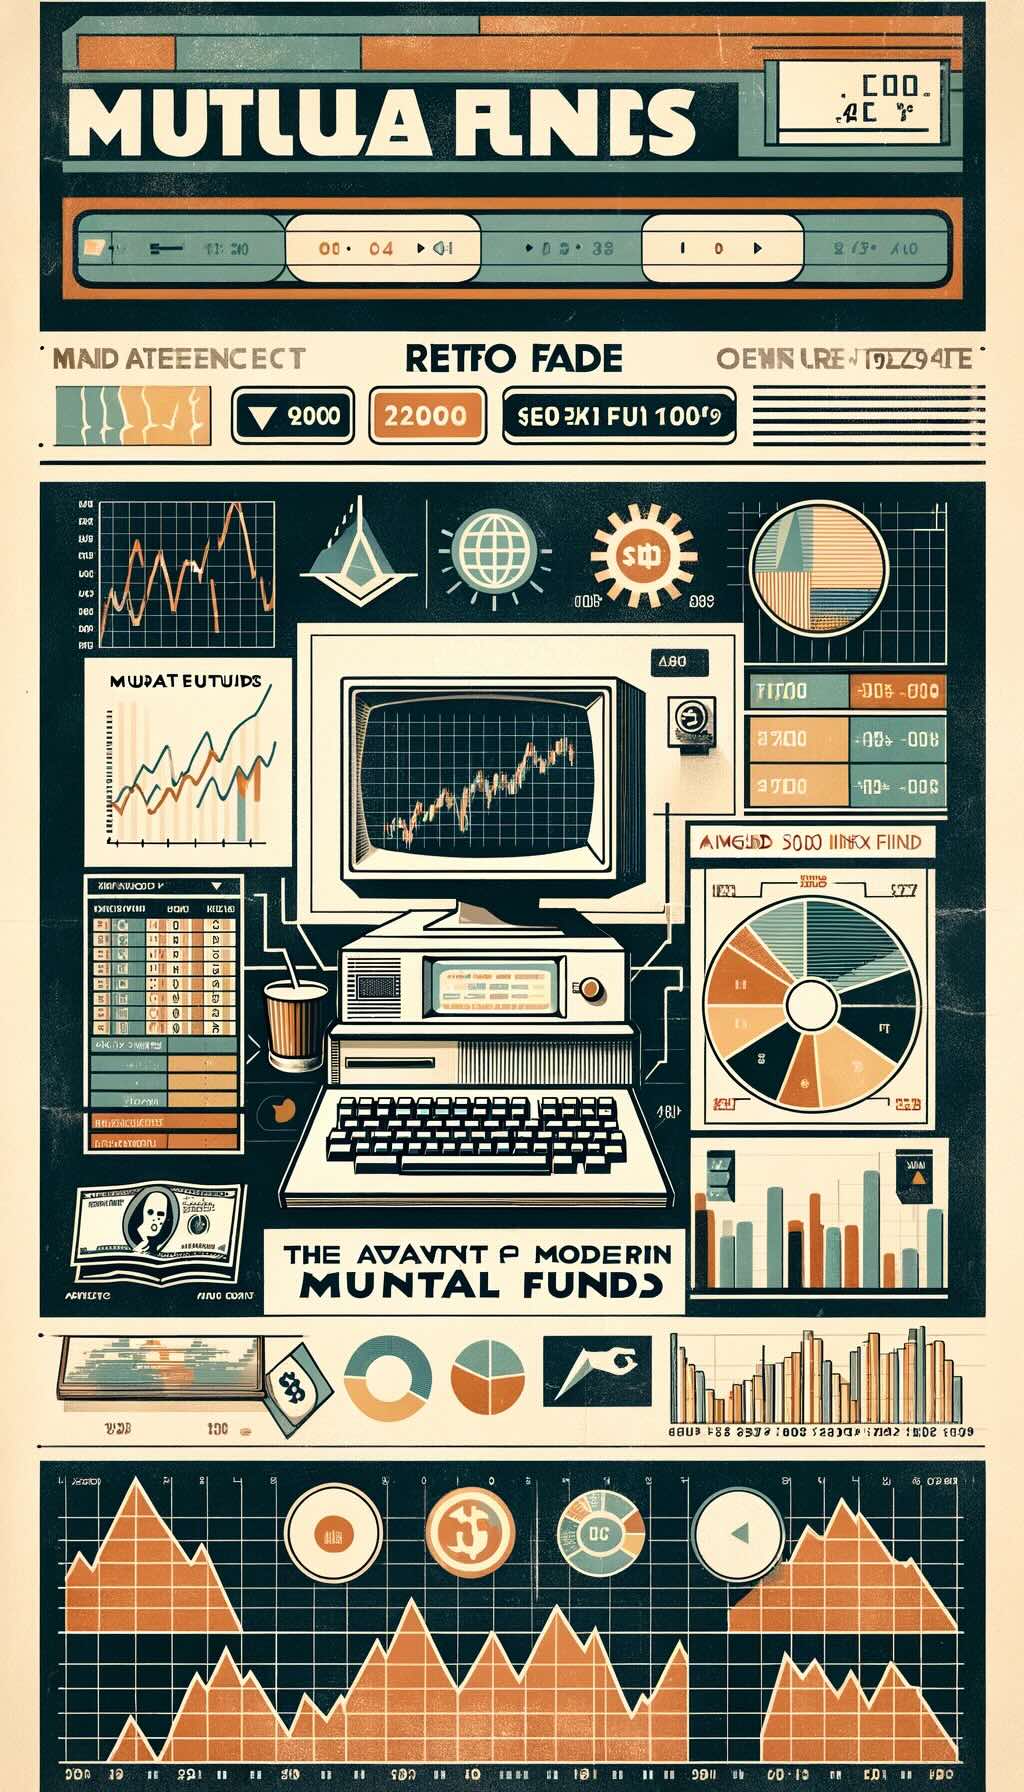 Advent of modern mutual funds in the late 20th century, capturing the innovation and popularity of mutual funds during this era